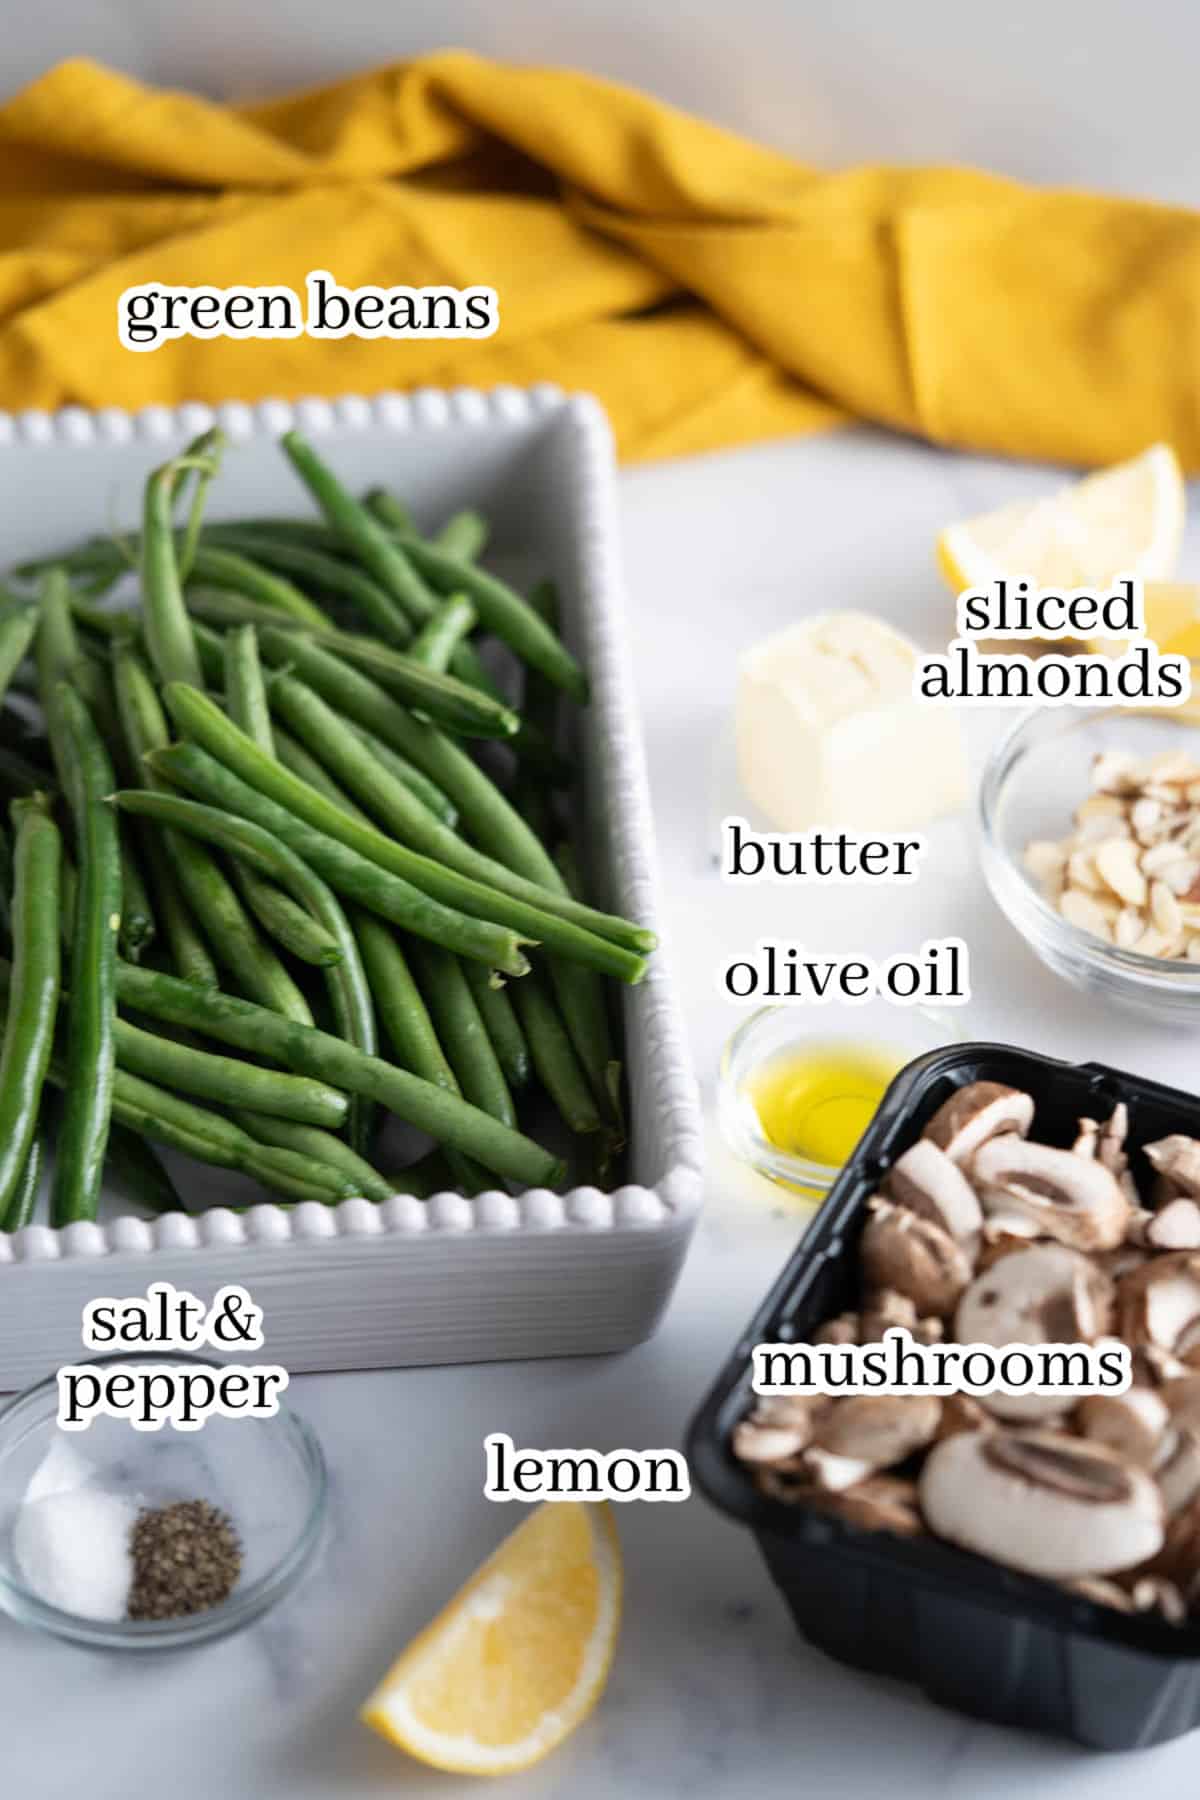 Ingredients to make the side dish recipe, with print overlay.